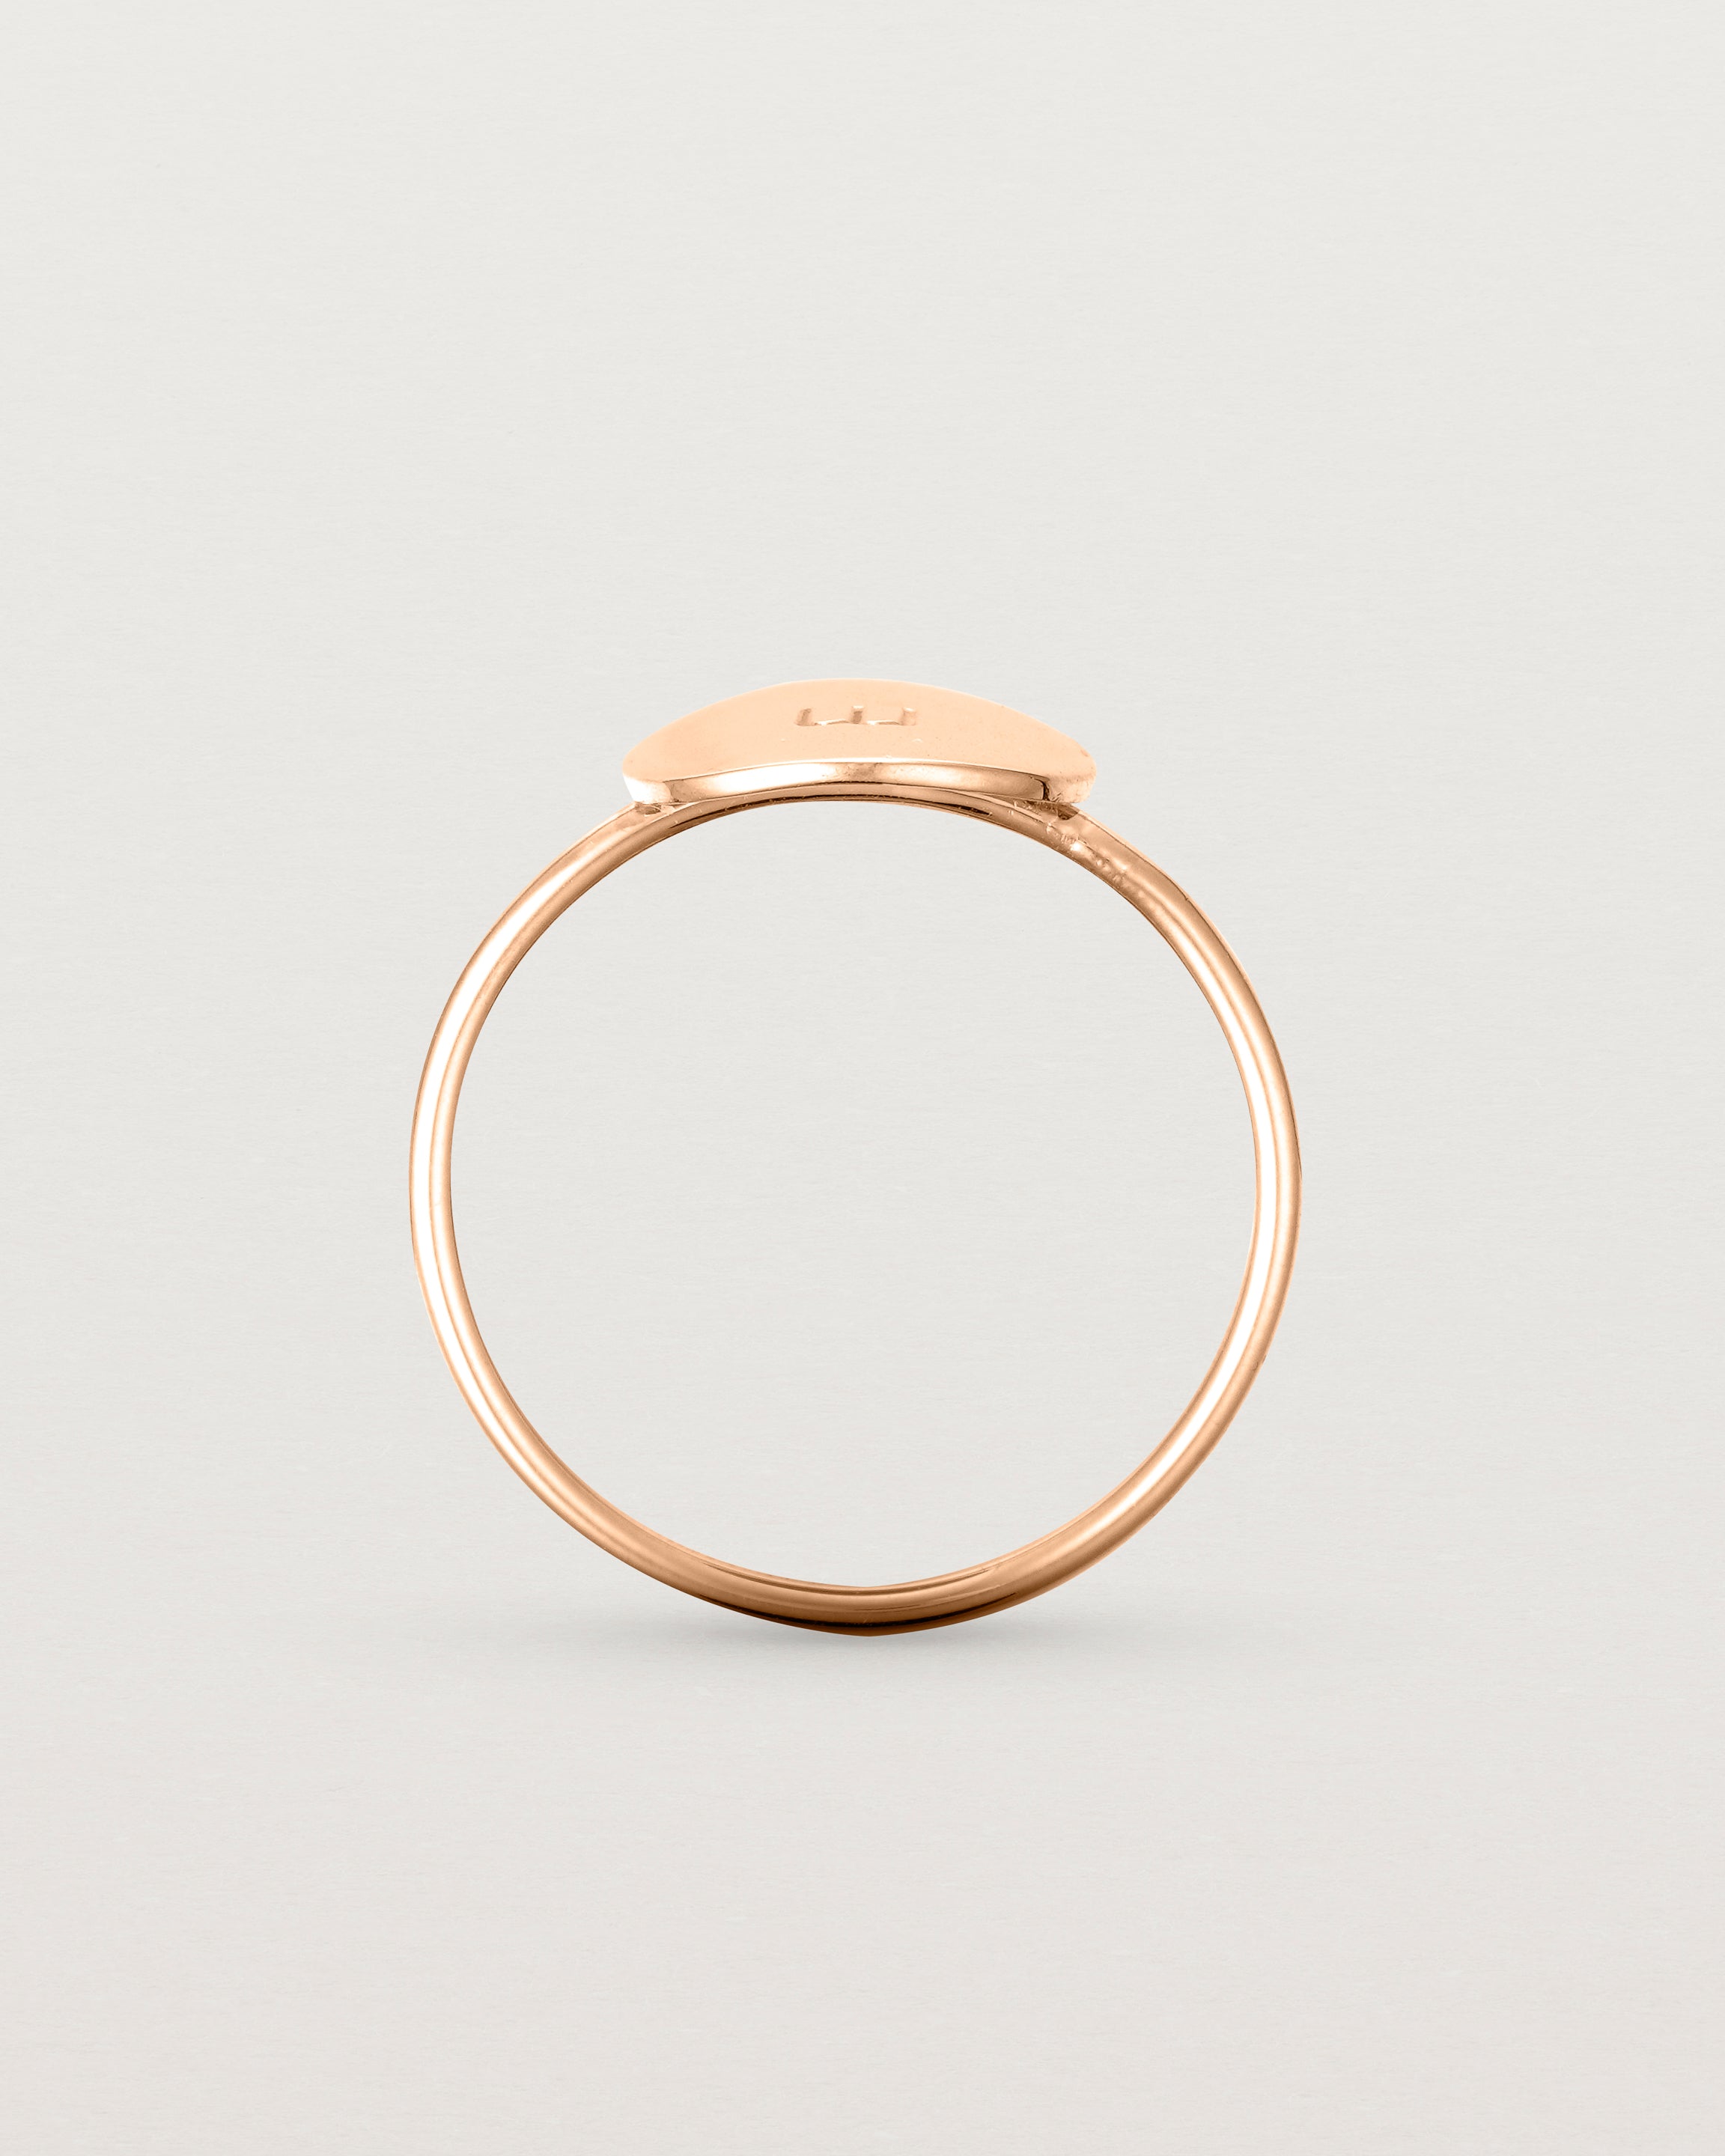 Standing view of the Mini Initial Ring in Rose Gold.